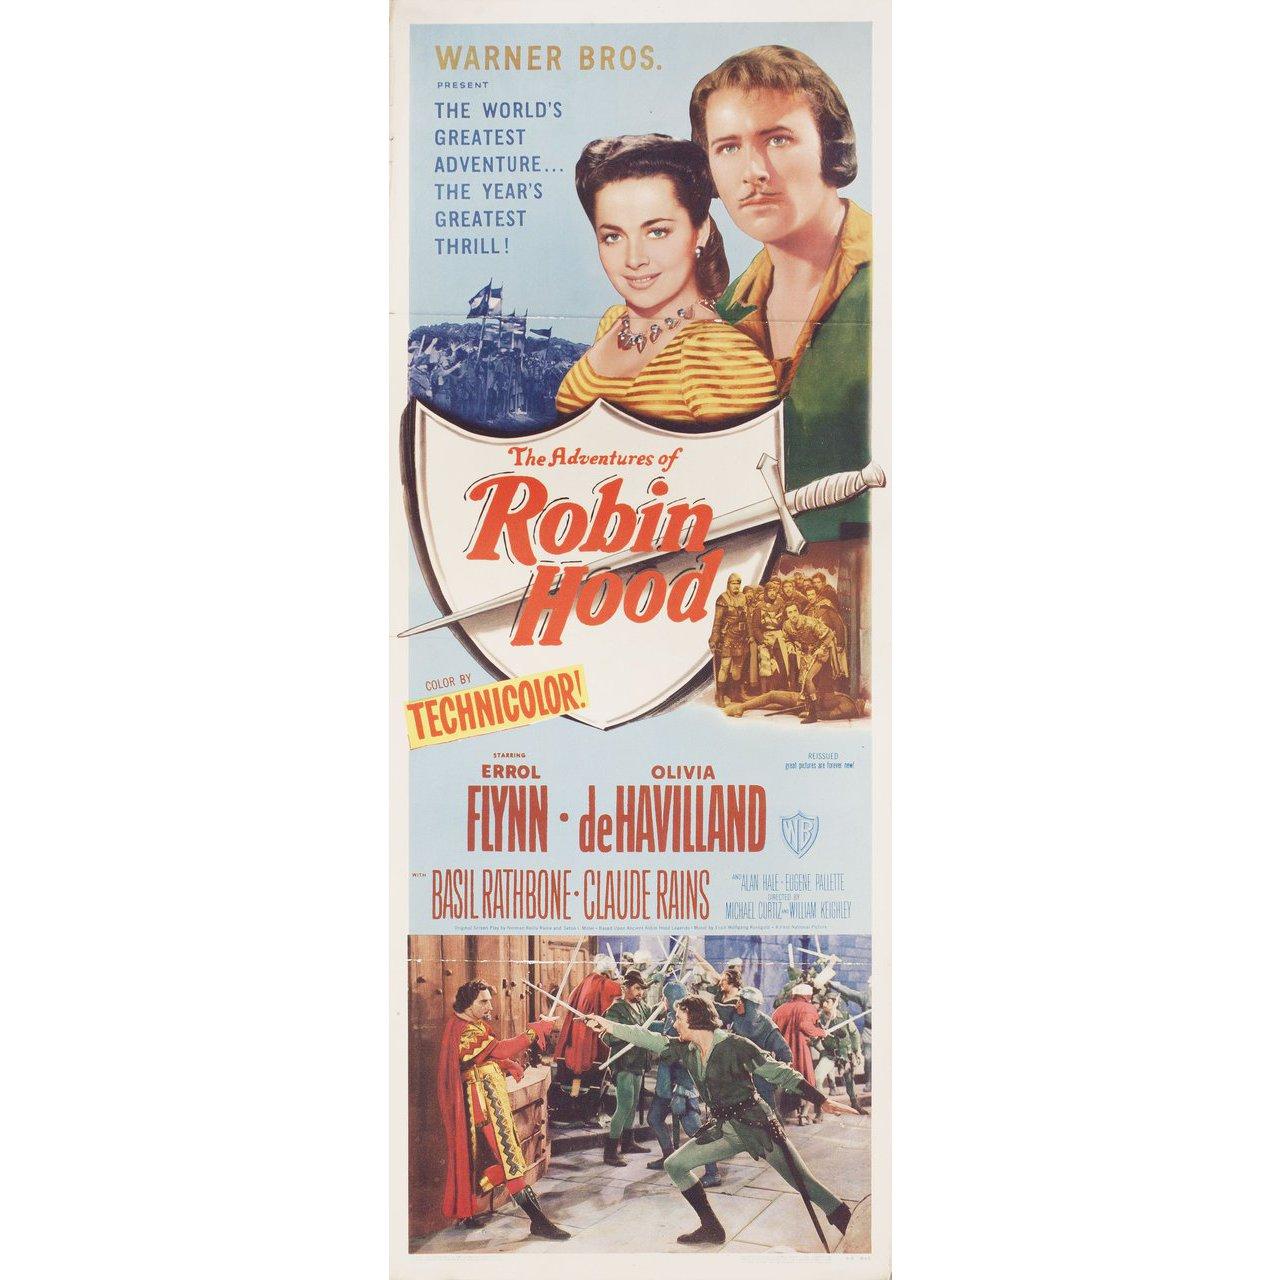 Original 1948 re-release U.S. insert poster for the 1938 film The Adventures of Robin Hood directed by Michael Curtiz / William Keighley with Errol Flynn / Olivia de Havilland / Basil Rathbone / Claude Rains. Very Good-Fine condition, folded. Many